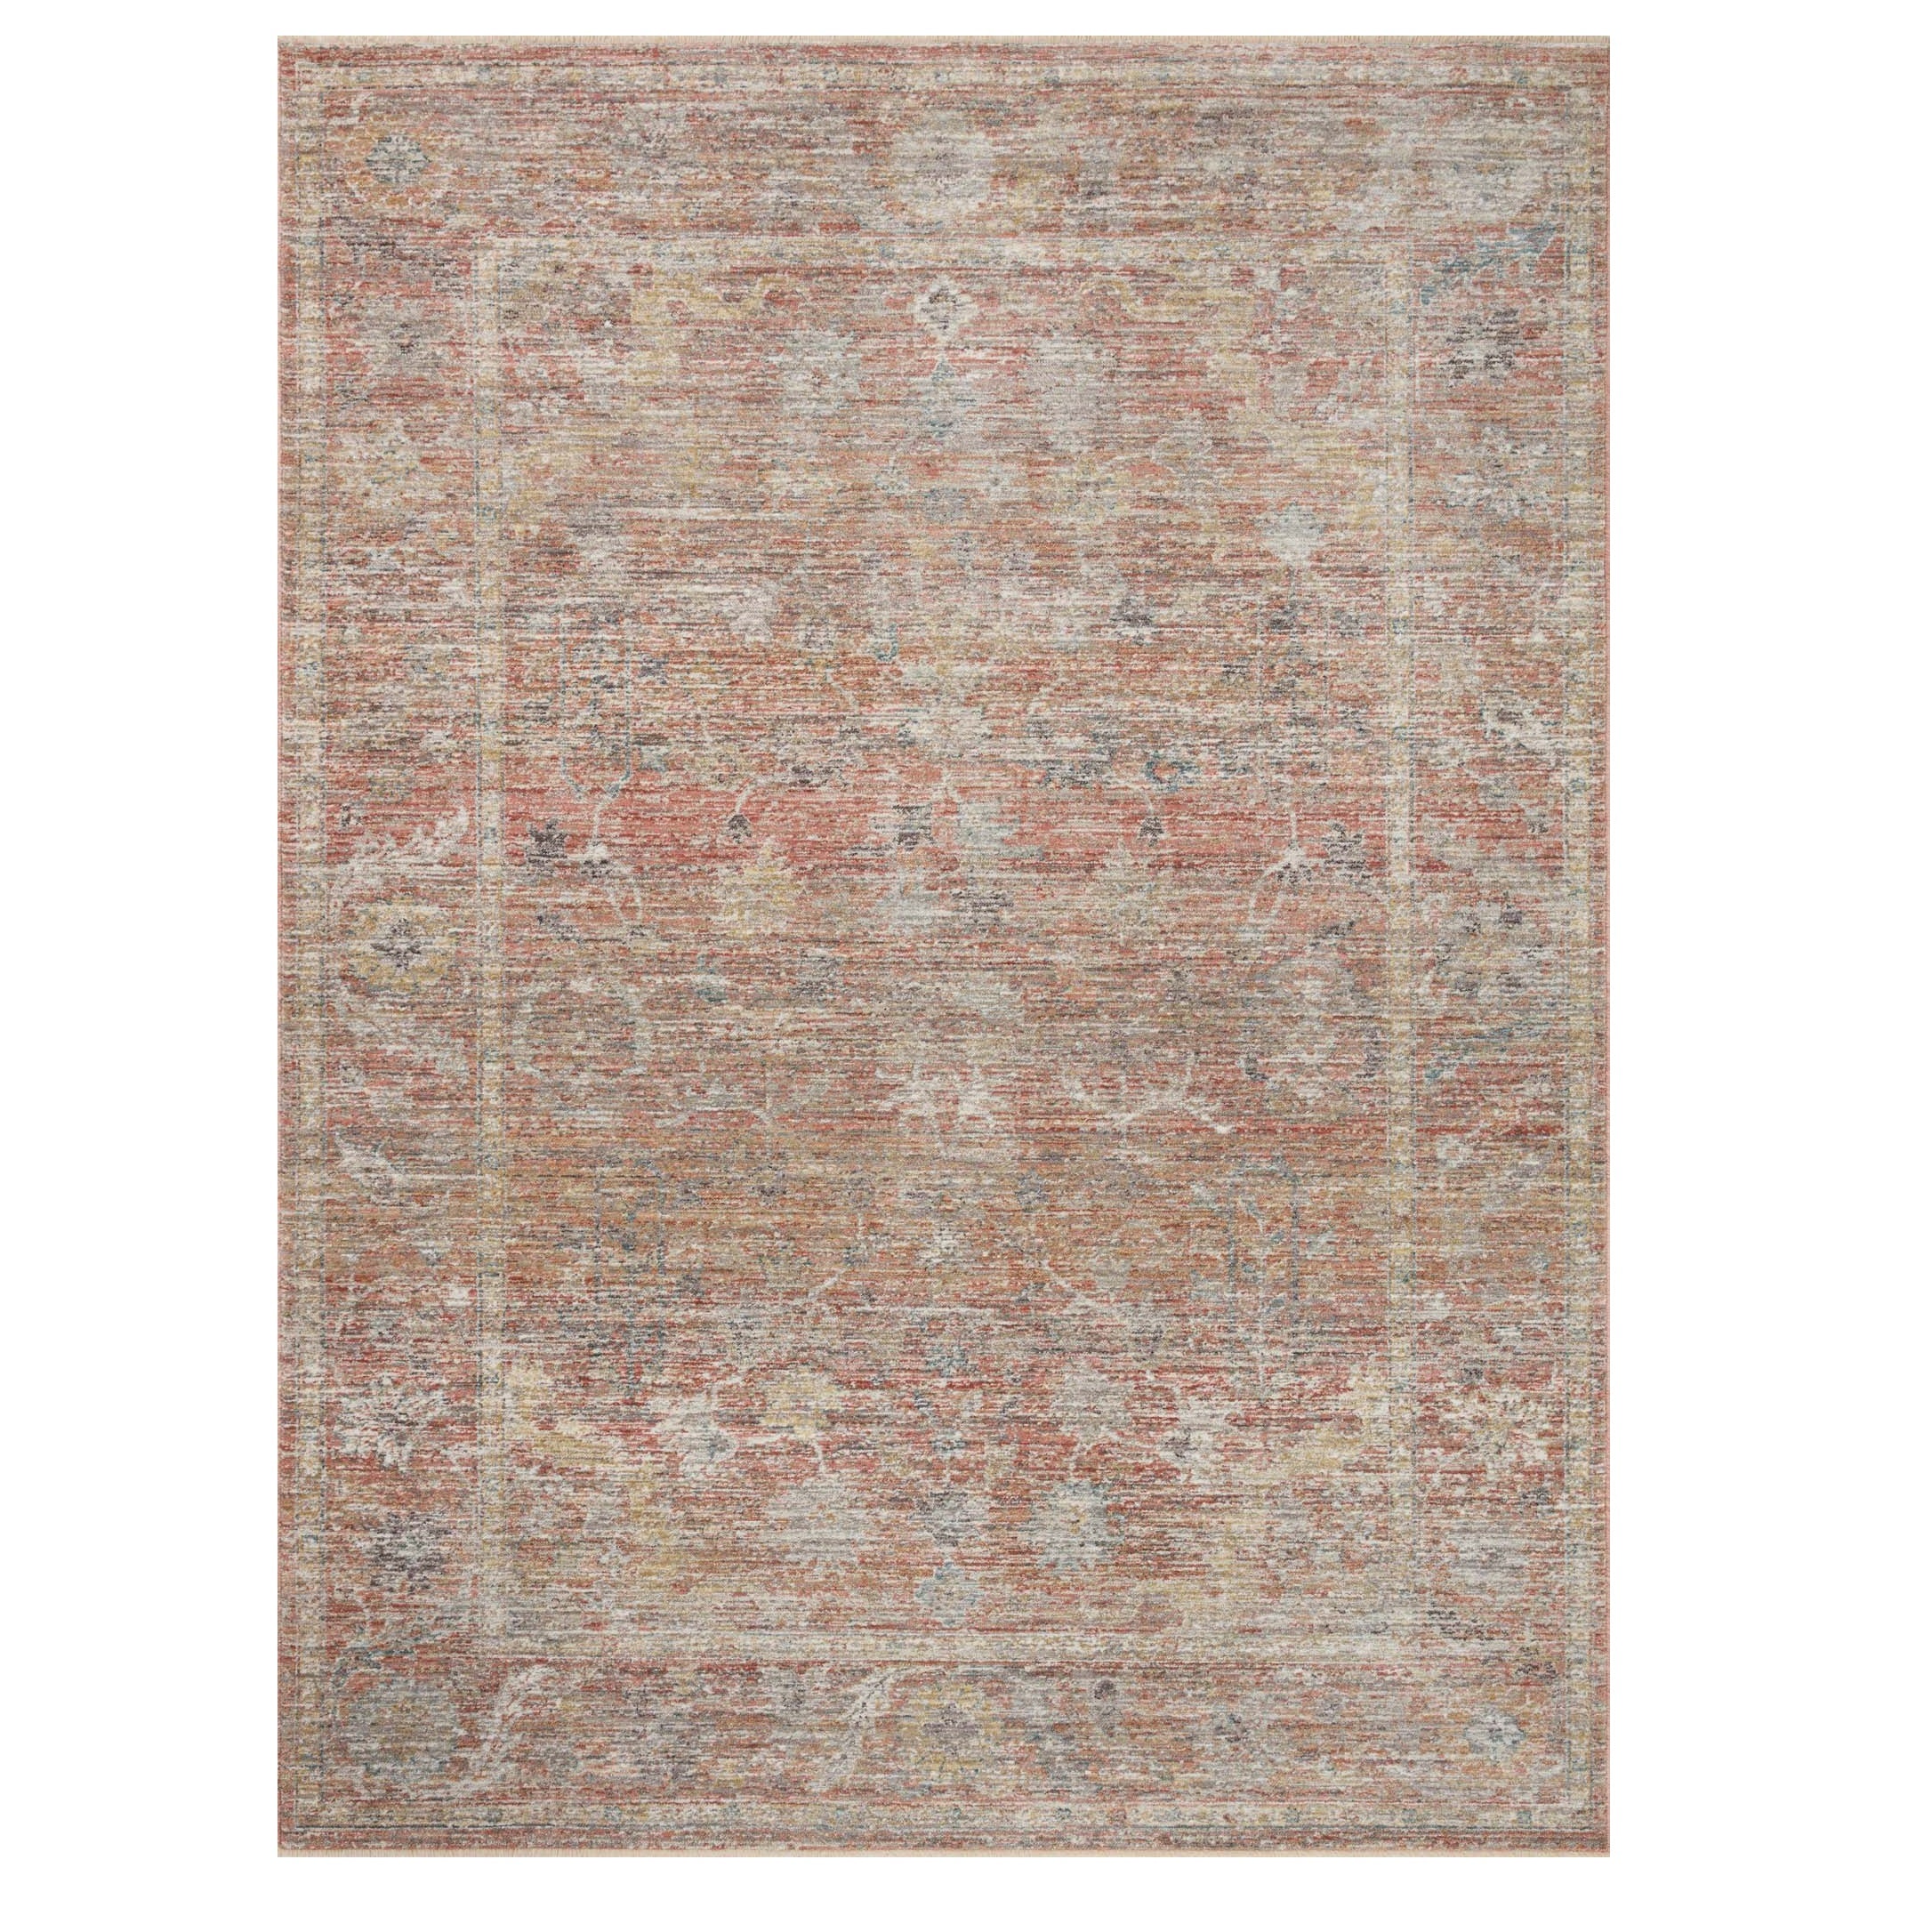 Millie Sunset Multi Rug Items range from $79.00 to $1899.00